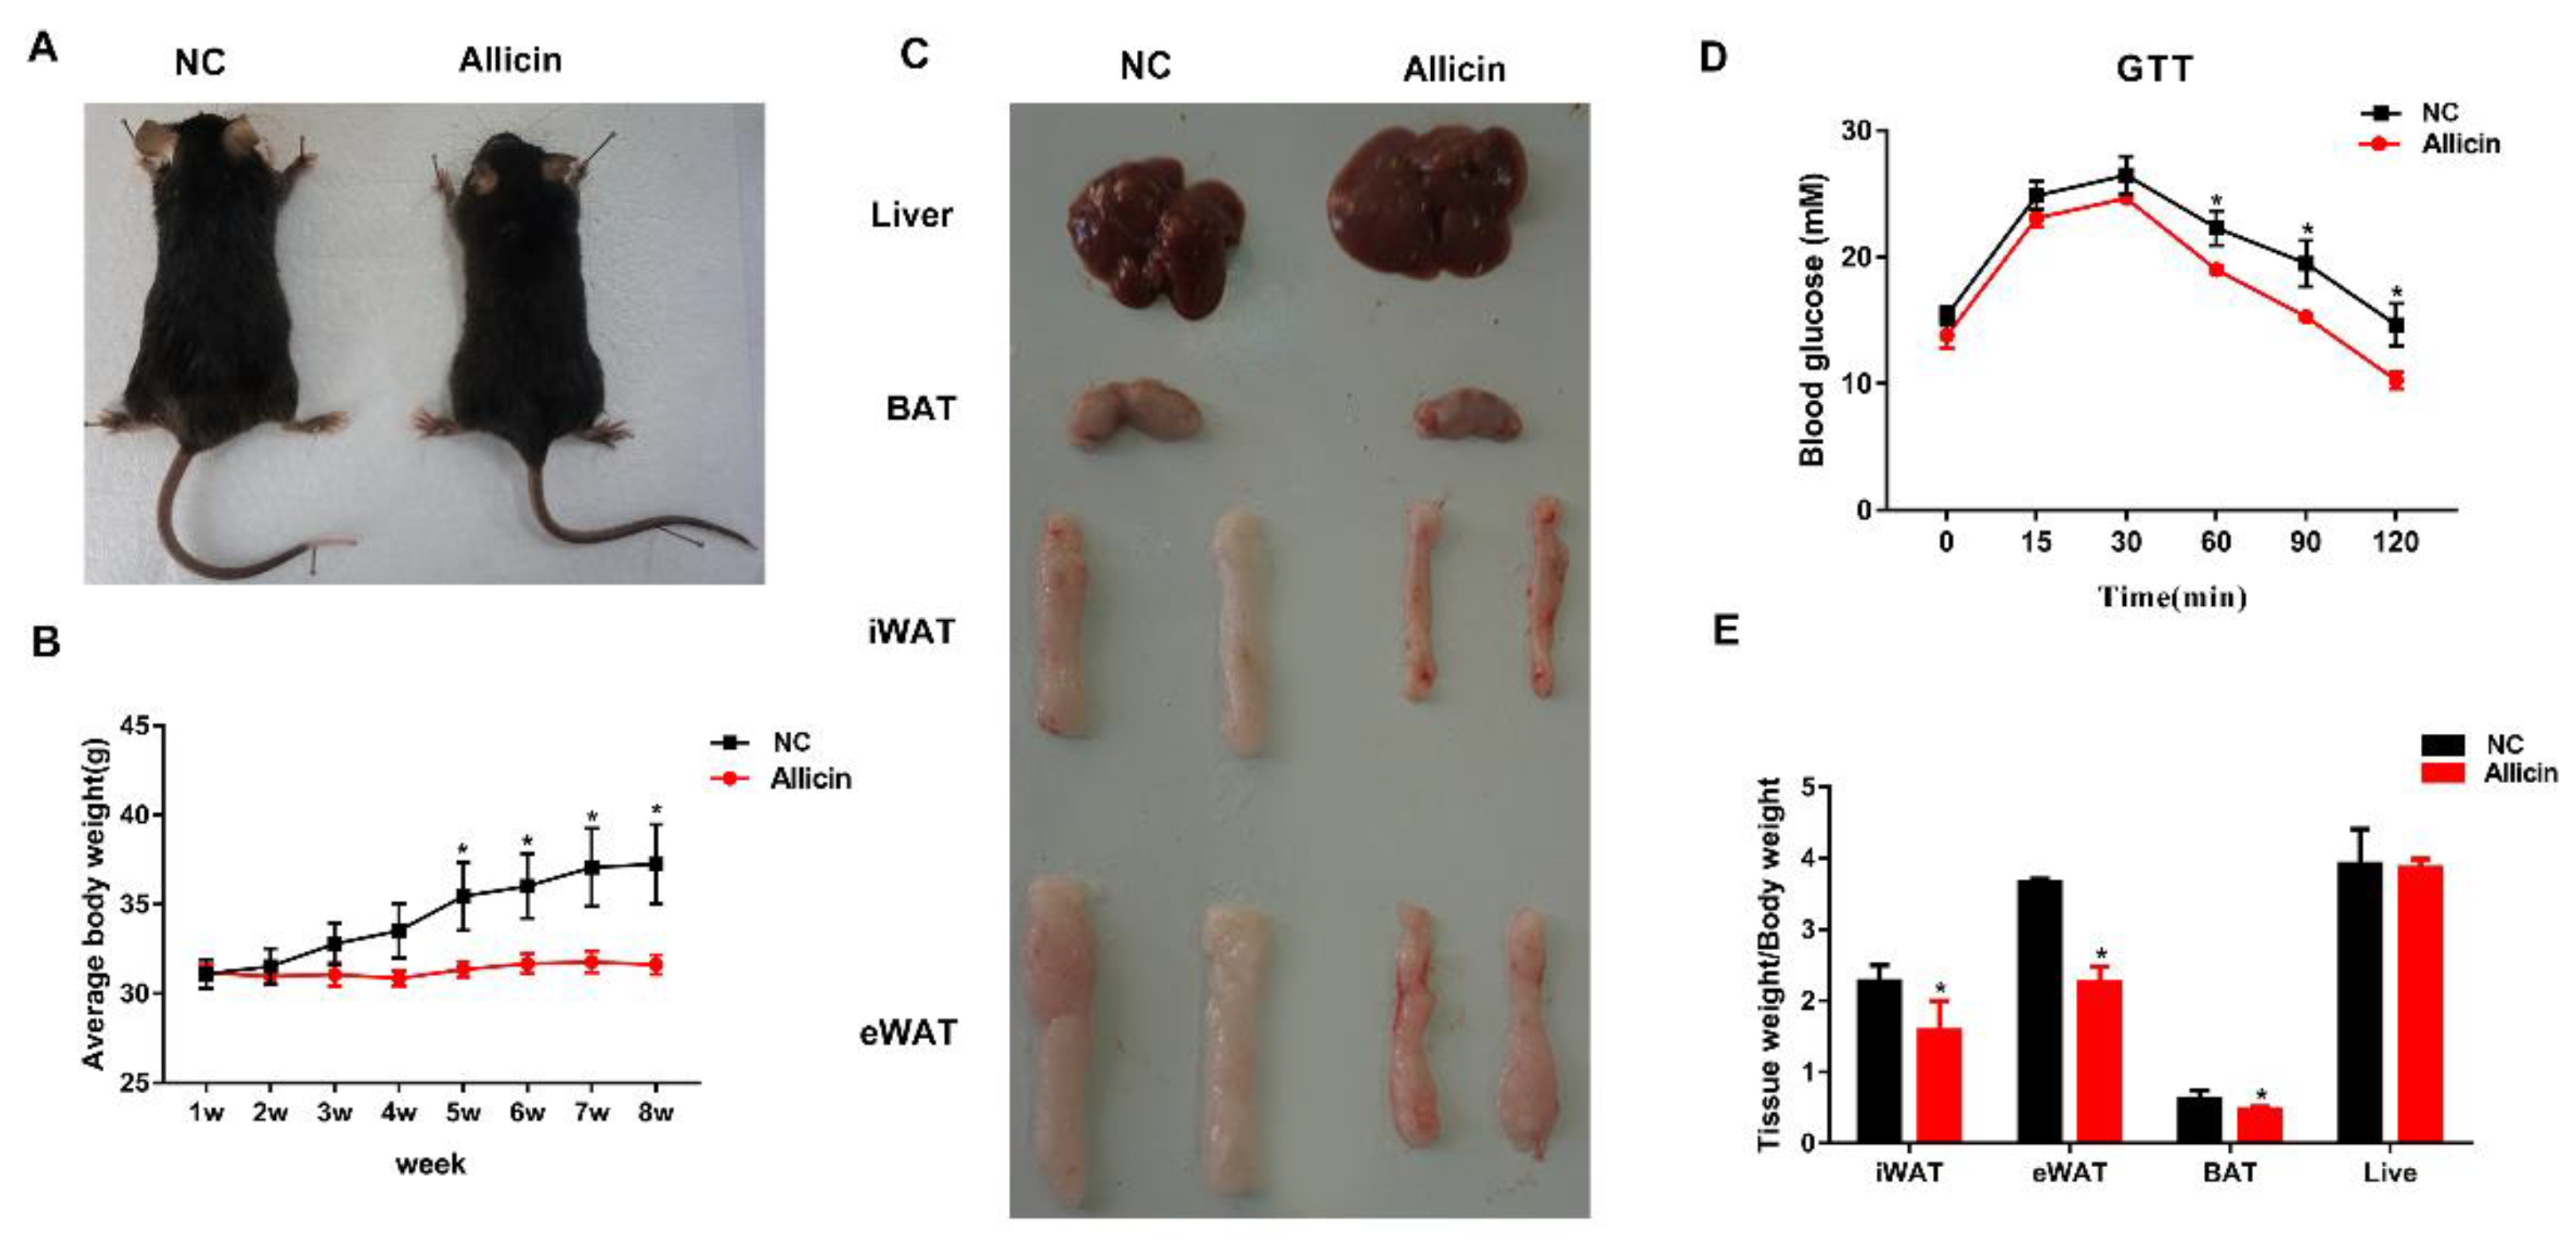 Nutrients | Free Full-Text | Allicin Improves Metabolism in High-Fat Diet-Induced  Obese Mice by Modulating the Gut Microbiota